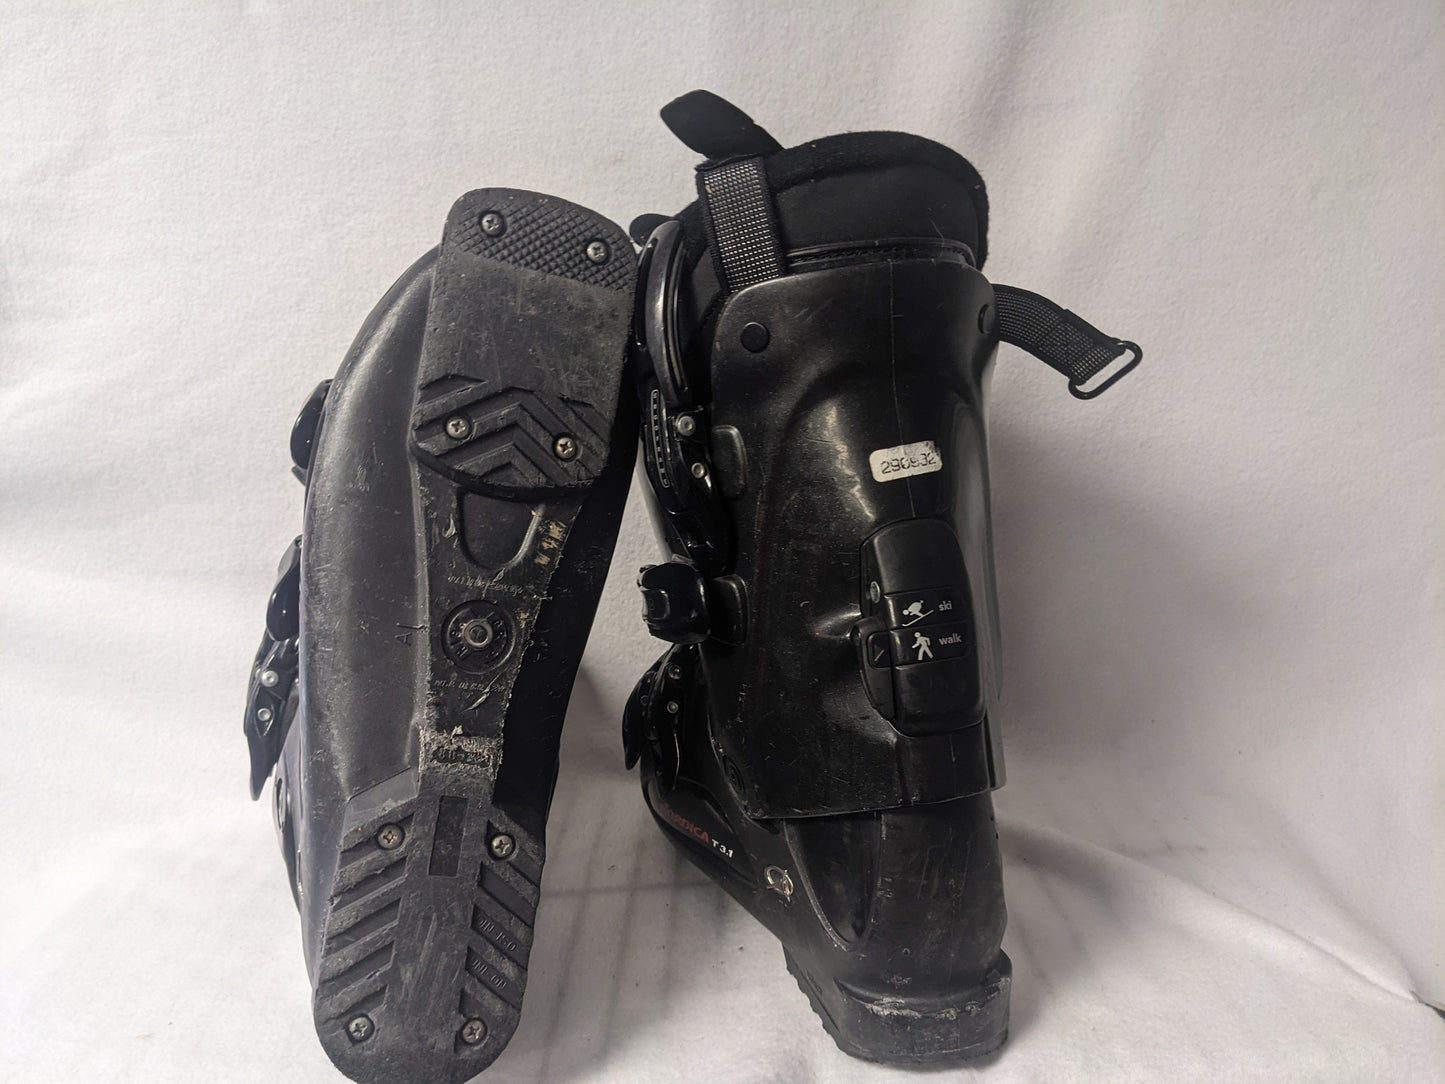 Nordica Olympia T3.1 Ski Boots Size 27.5 Color Black Condition Used